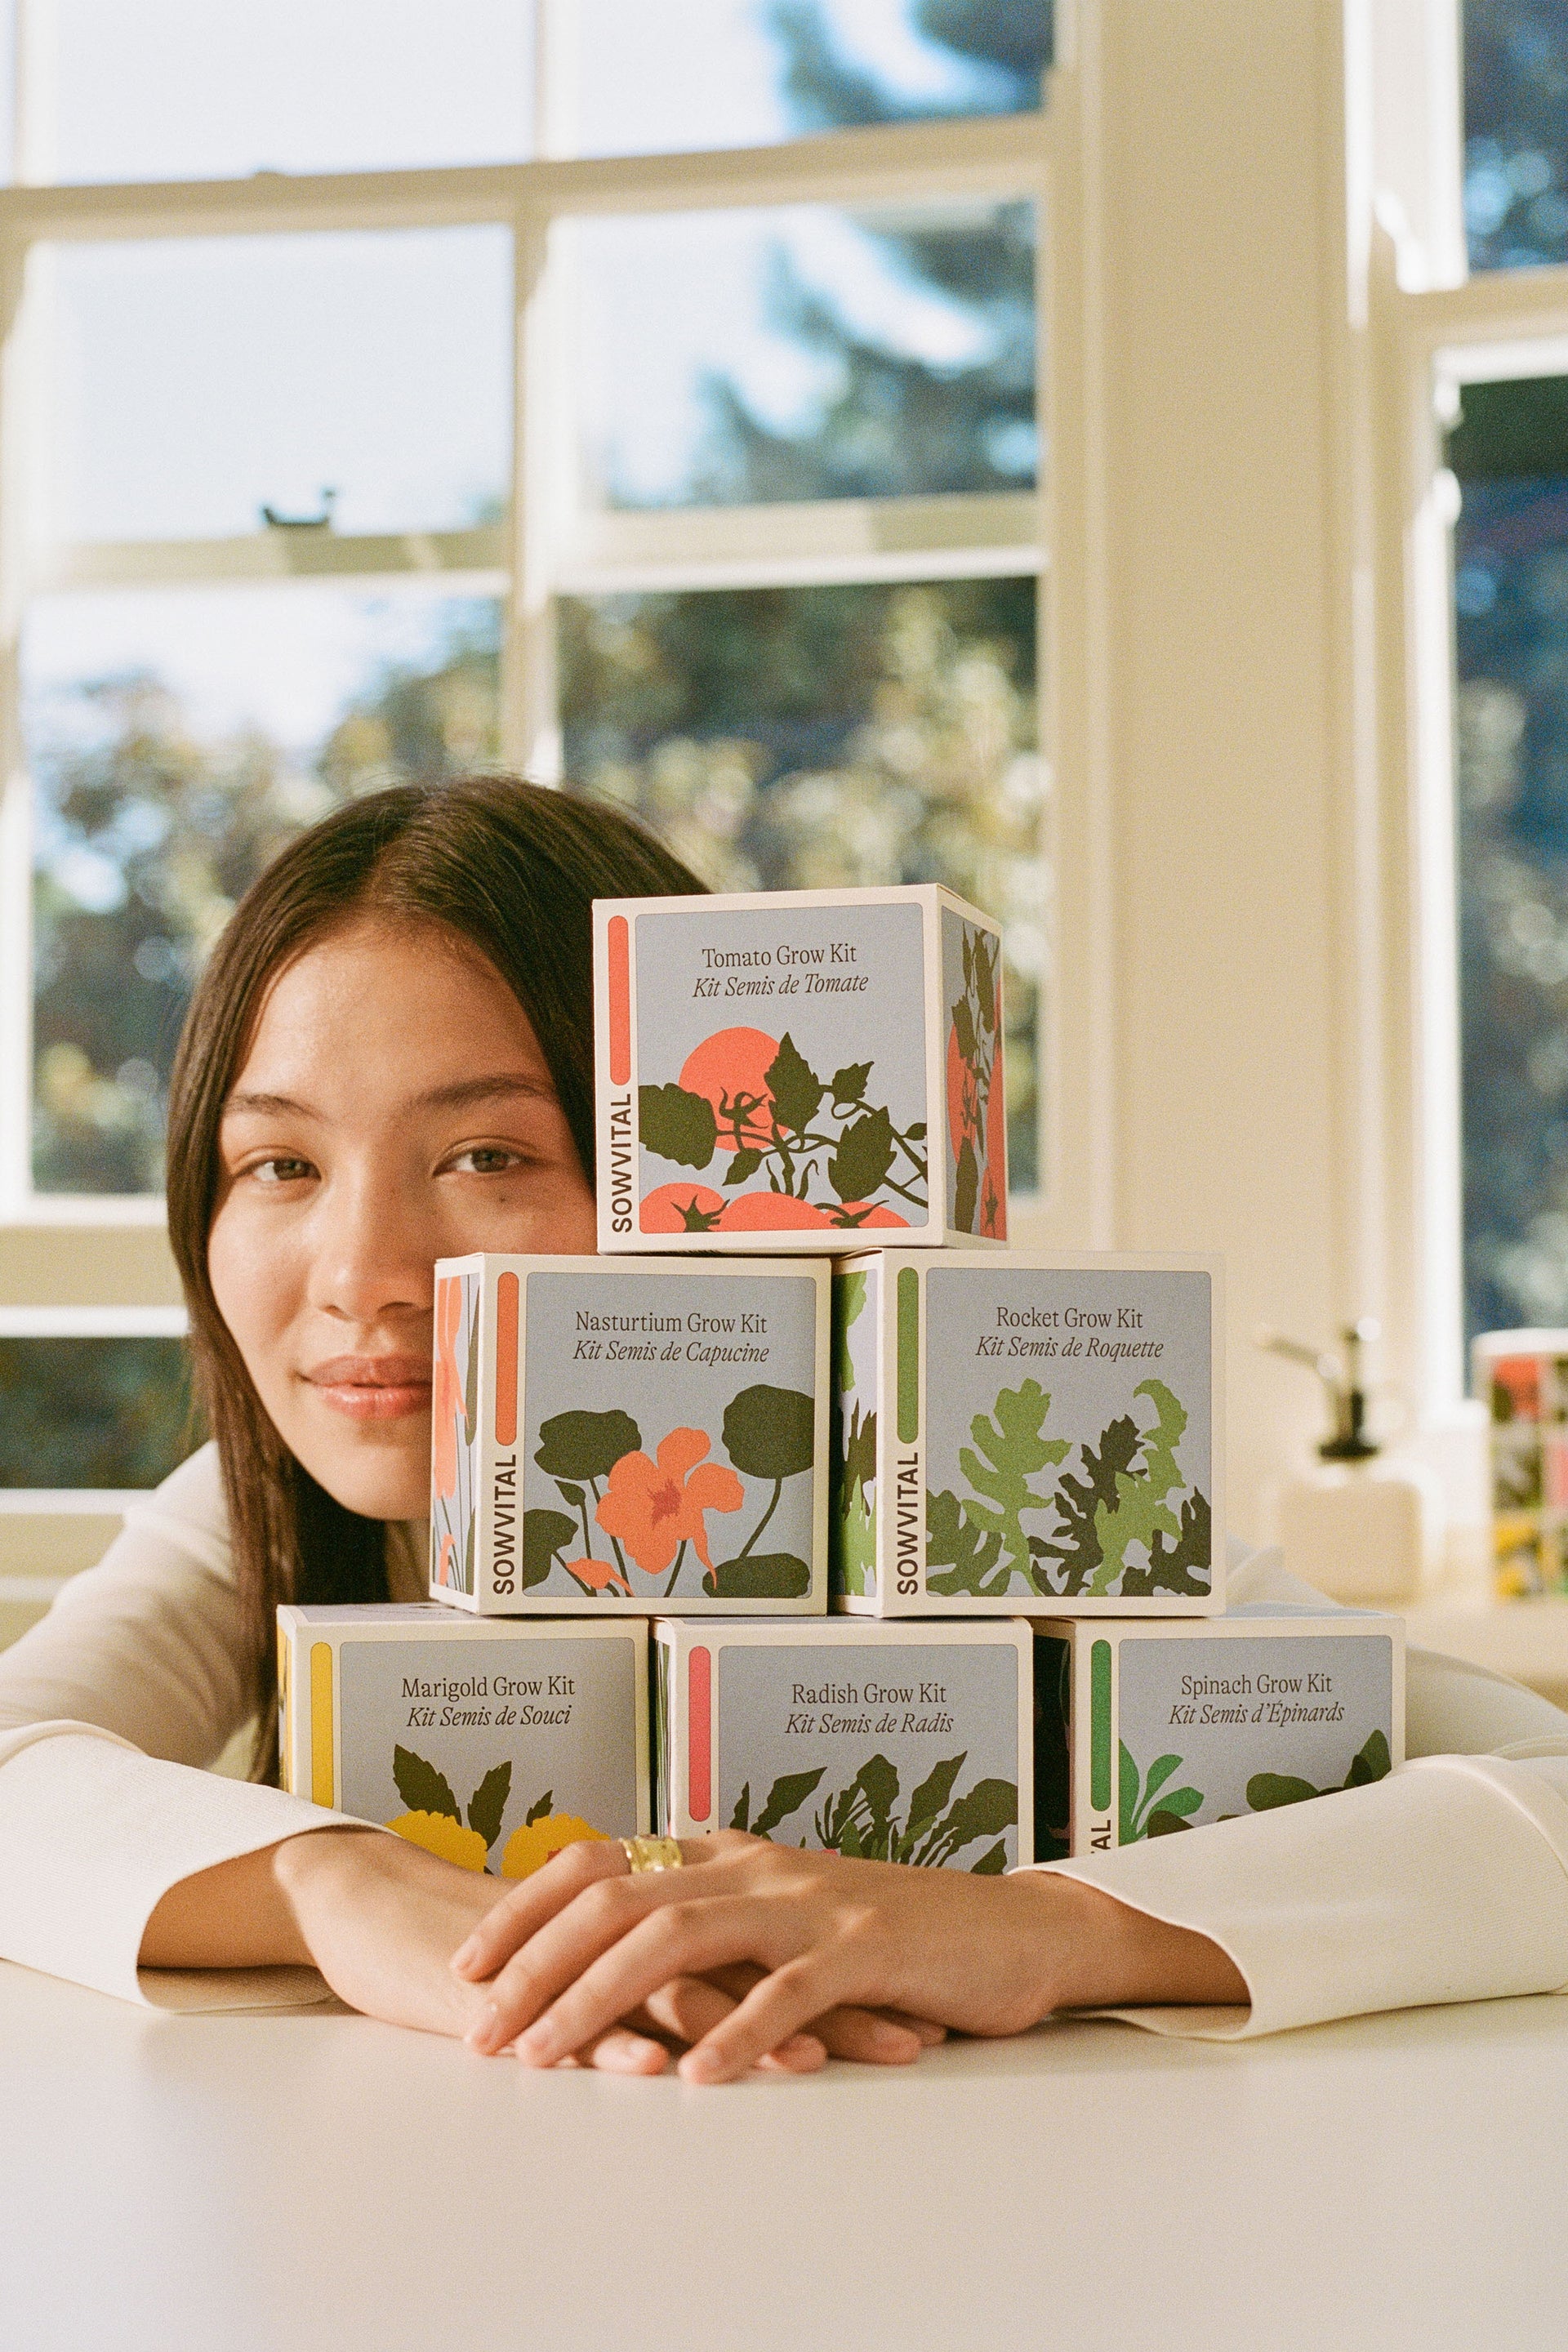 A pile of grow kits, including tomato, nasturtium, rocket, marigold, radish and spinach, with a Asian lady hugging it on the table.